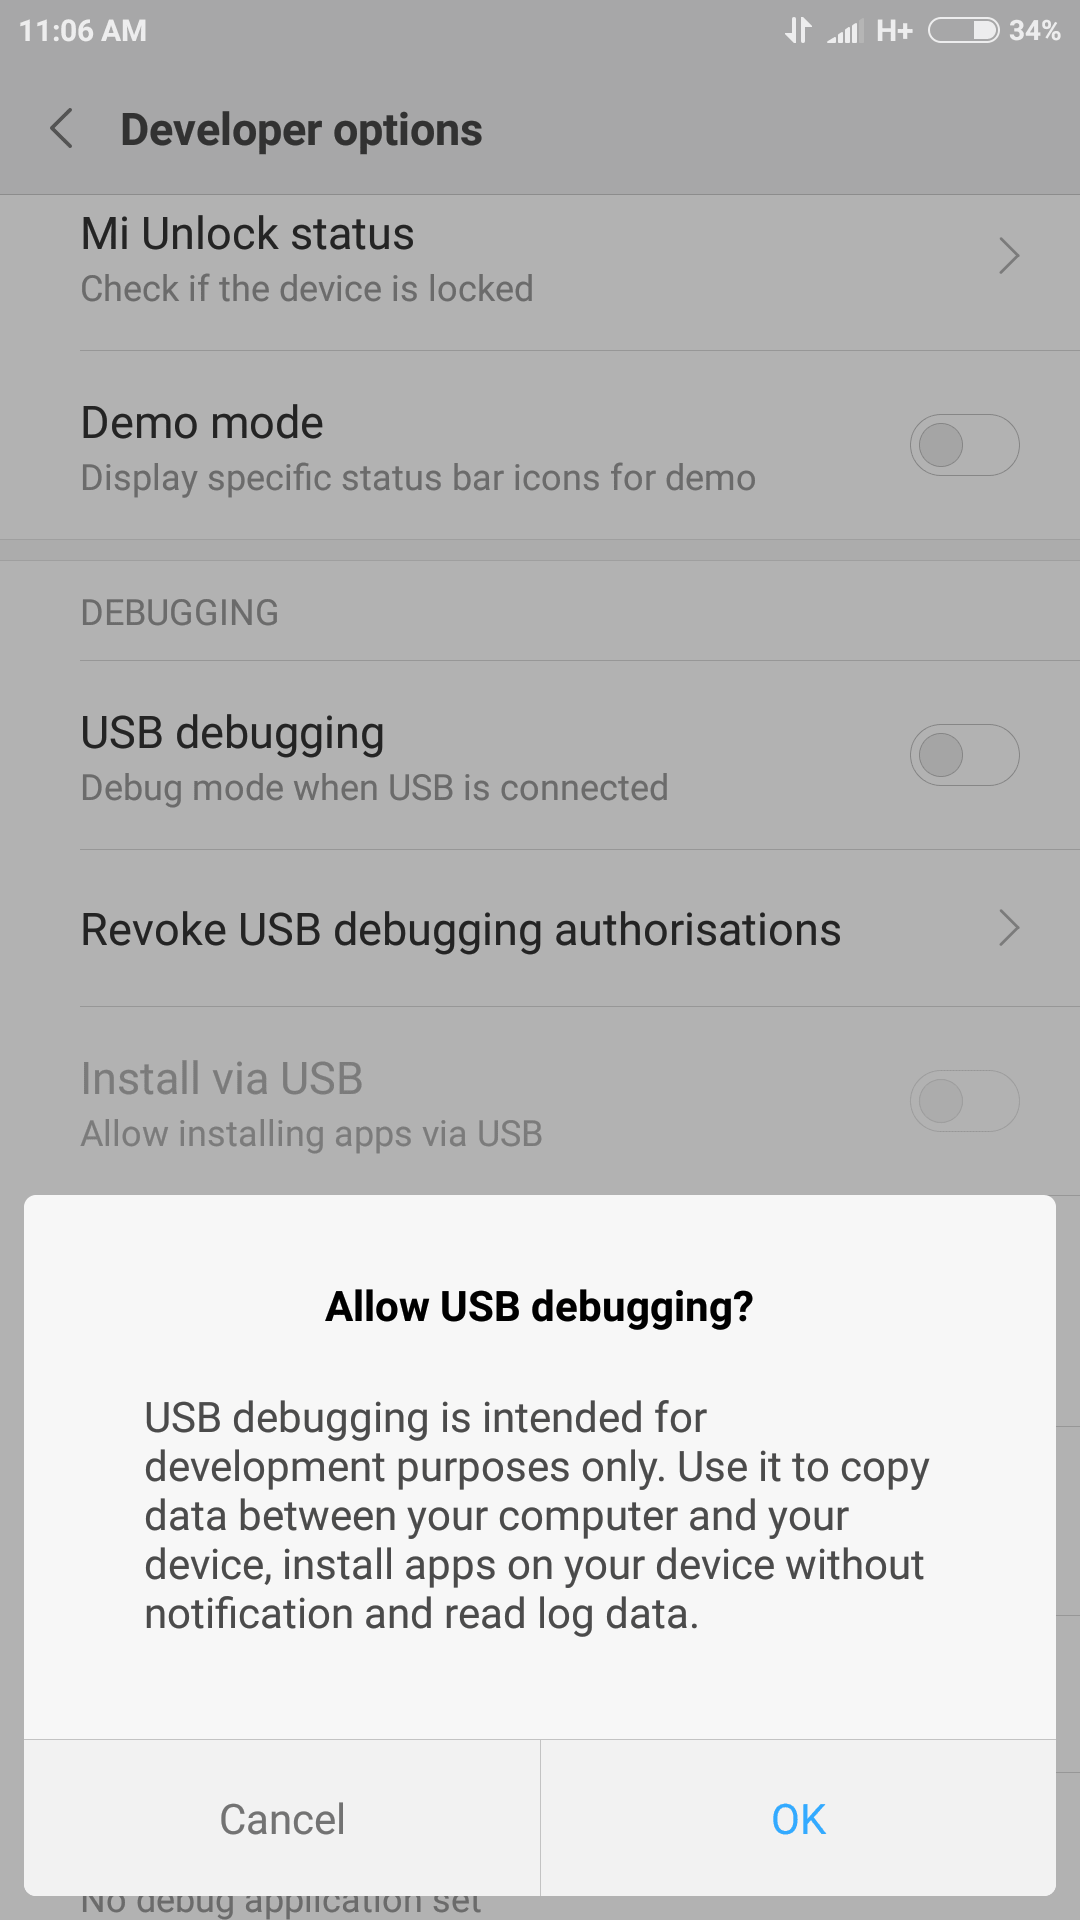 Allow the permission for USB debugging